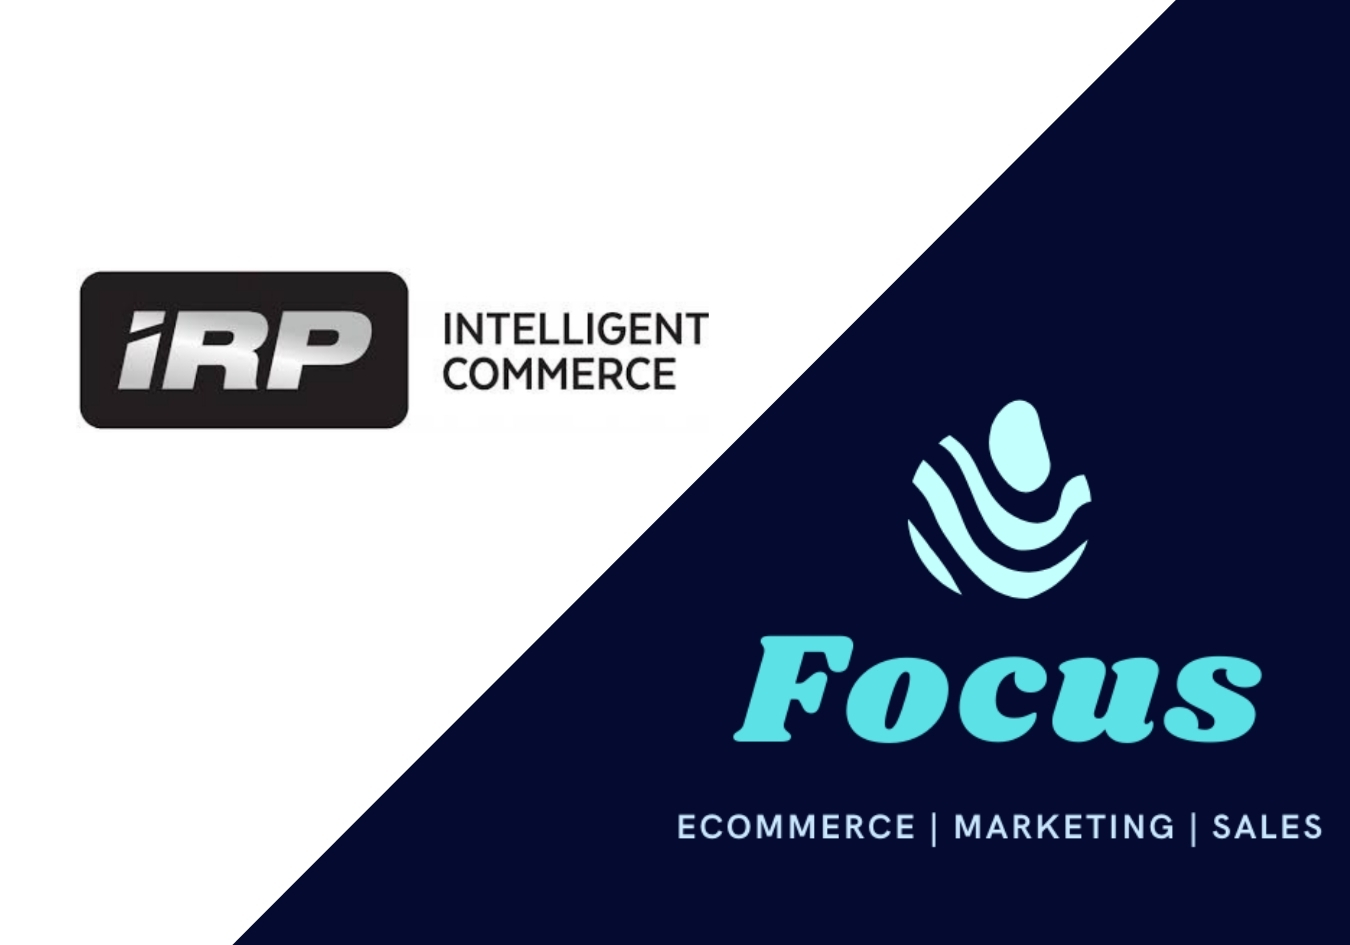 IRP Commerce | Focus Ecommerce and Marketing